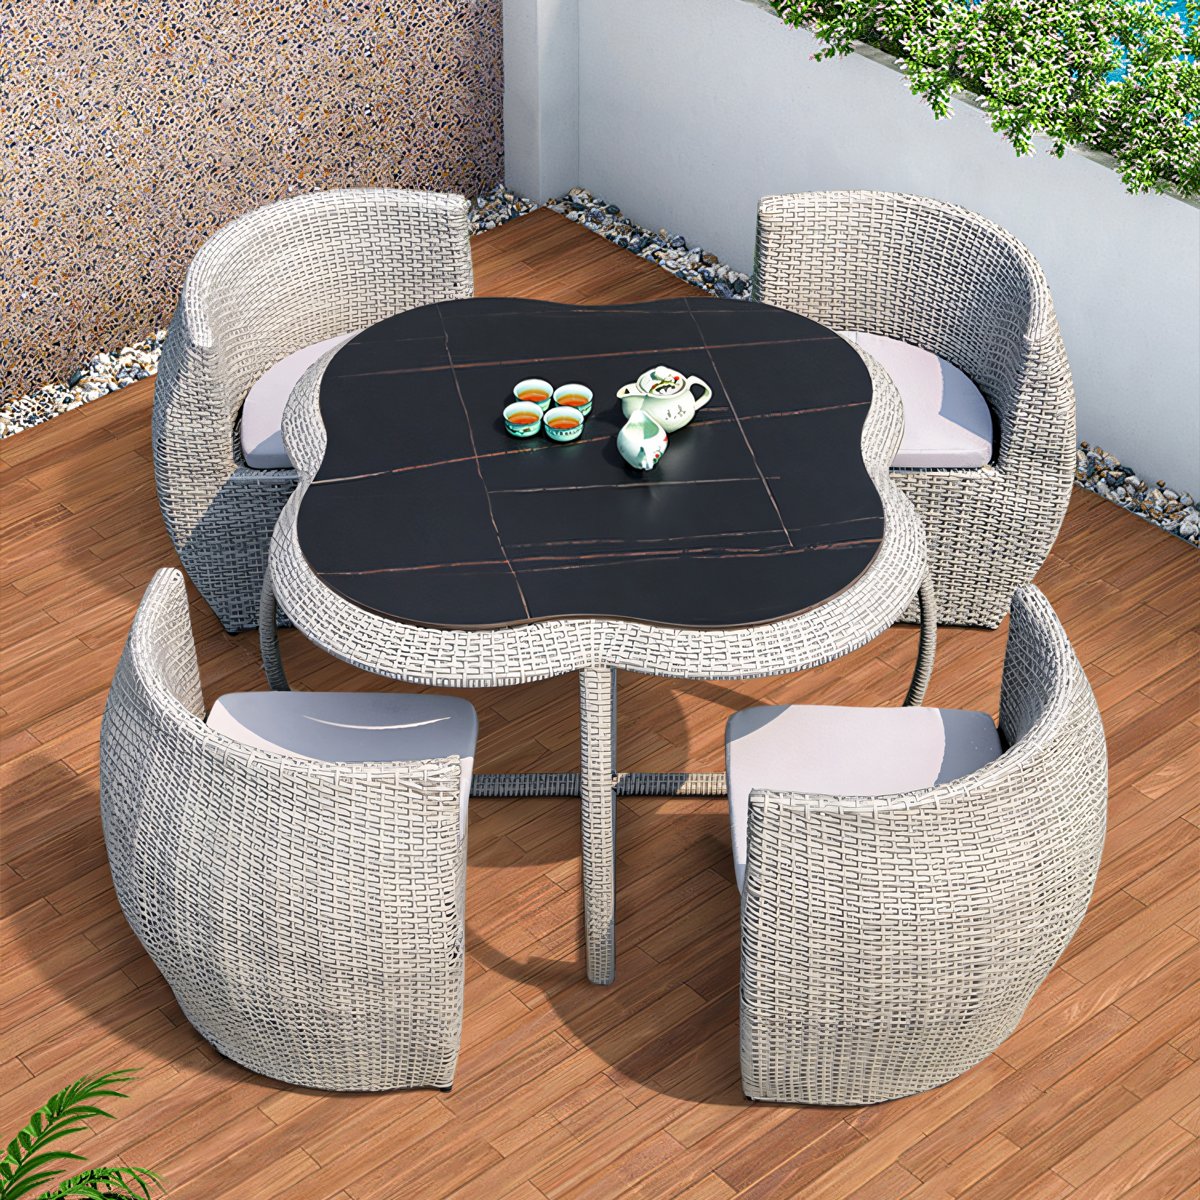 Small Tables & Patio sets